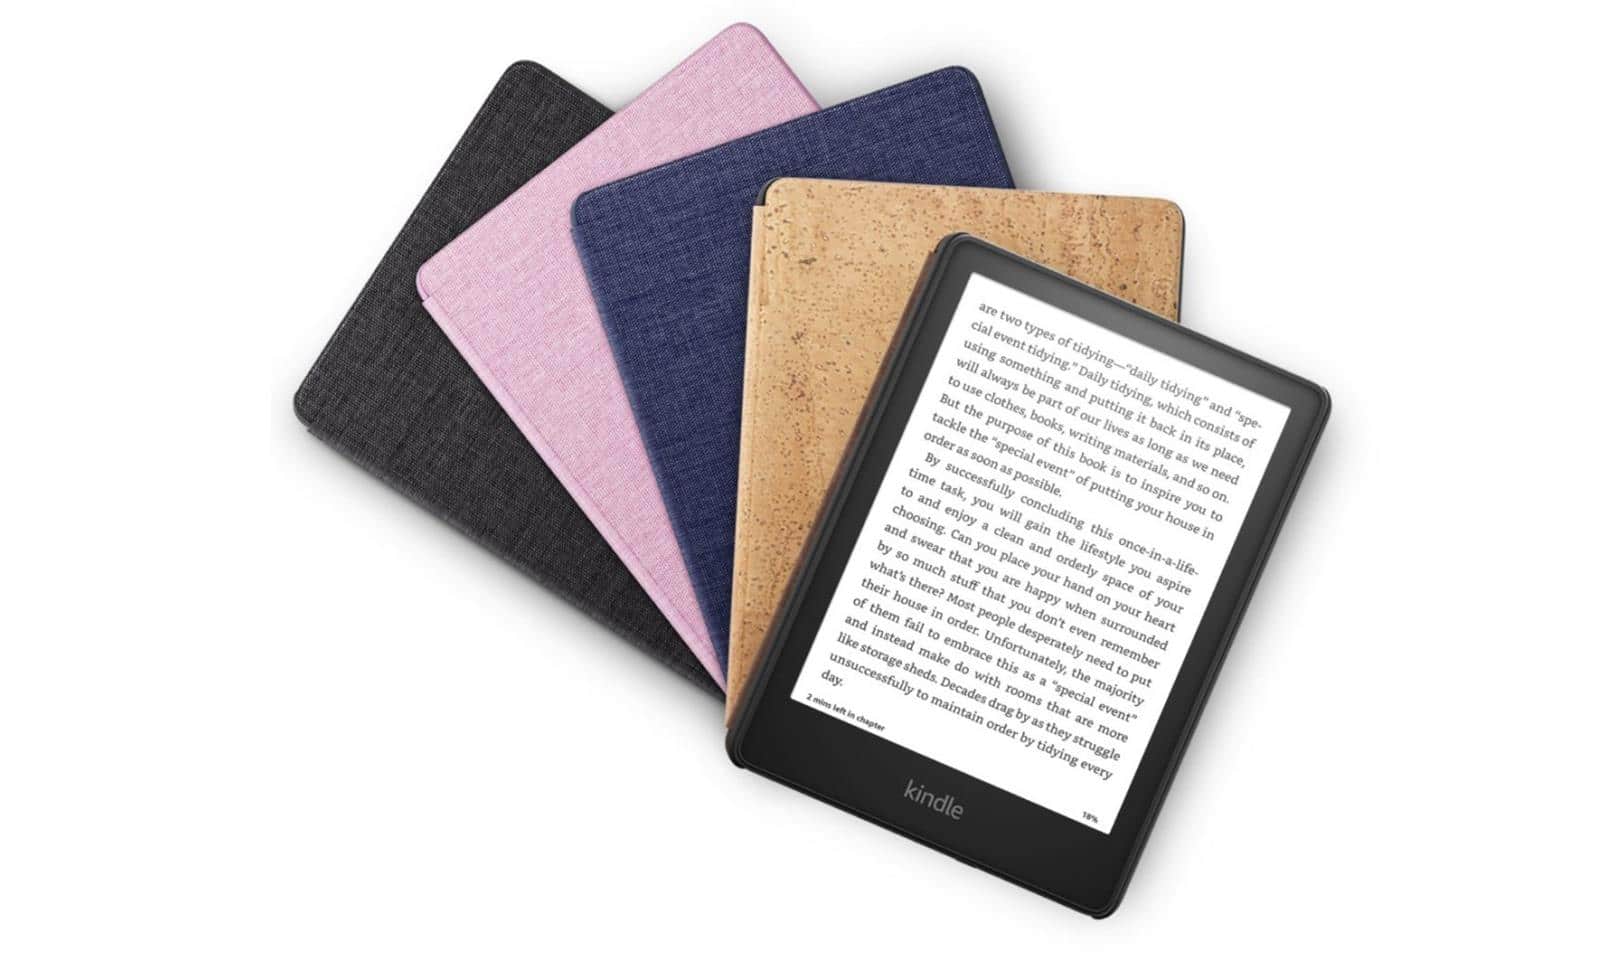 Fifth generation Kindle Paperwhite.  What do the readers offer in the version for 2021?